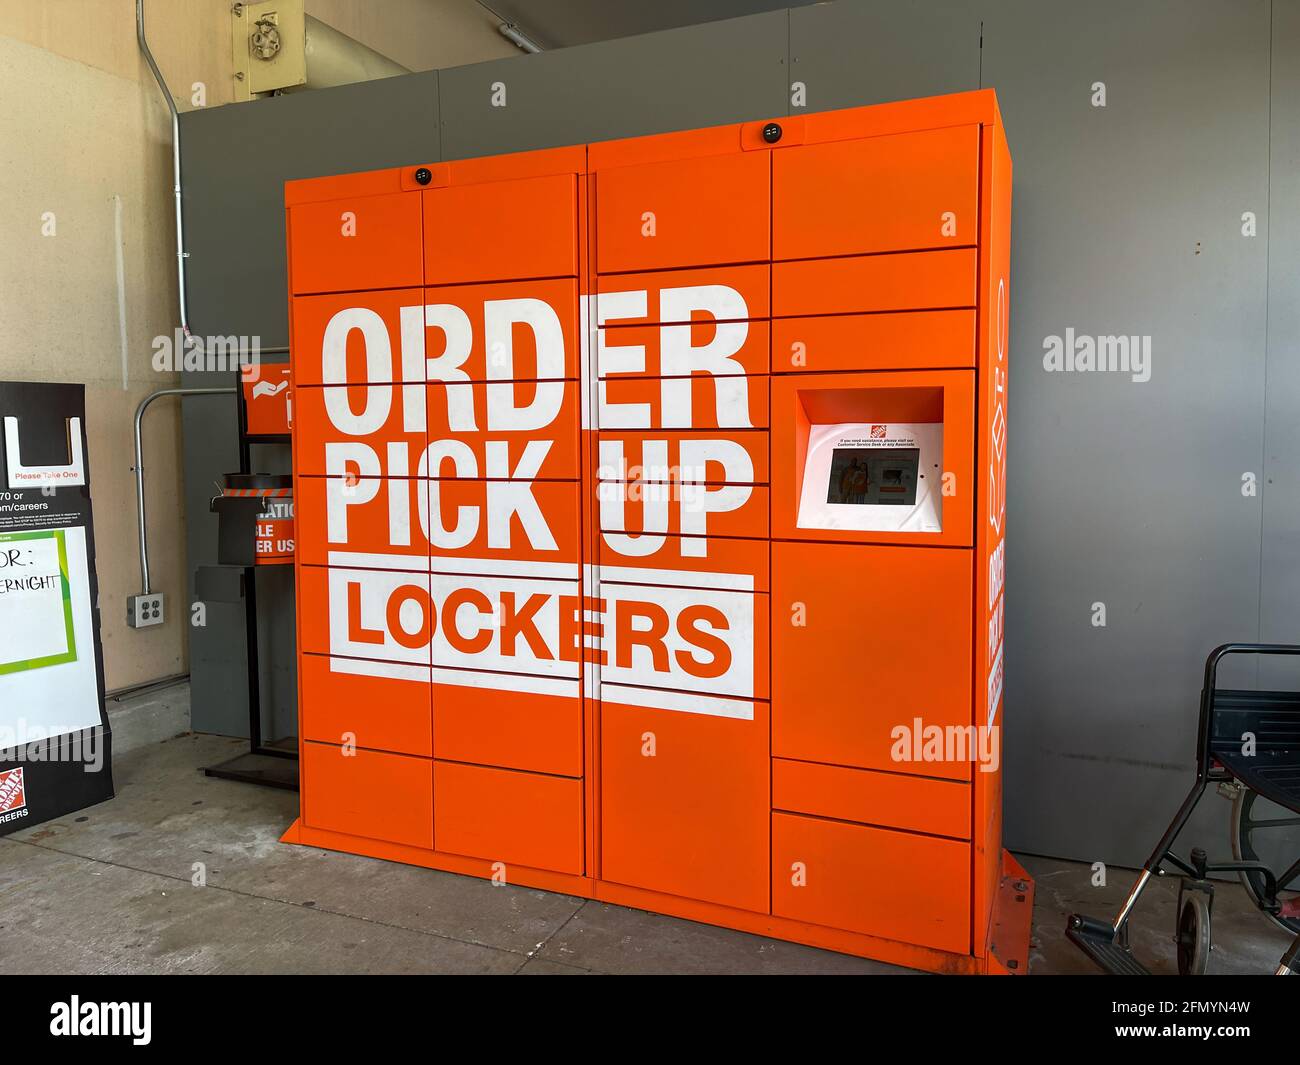 Orlando, FL USA - April 26, 2021:  The order pickup lockers for online orders at a Home Depot Home Improvement Store in Orlando, Florida. Stock Photo